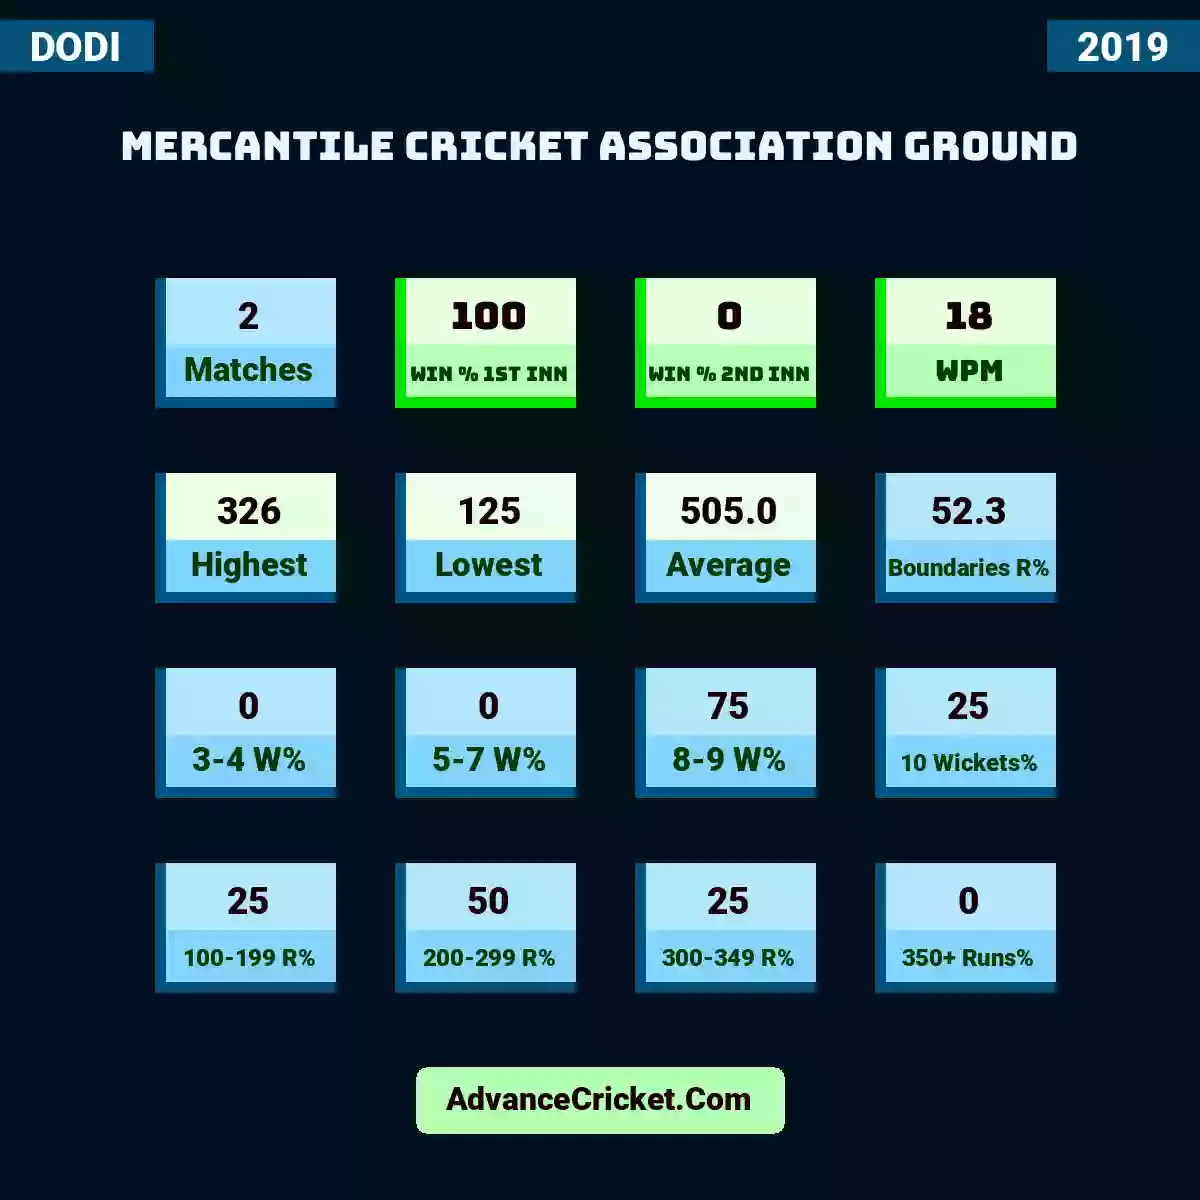 Image showing Mercantile Cricket Association Ground with Matches: 2, Win % 1st Inn: 100, Win % 2nd Inn: 0, WPM: 18, Highest: 326, Lowest: 125, Average: 505.0, Boundaries R%: 52.3, 3-4 W%: 0, 5-7 W%: 0, 8-9 W%: 75, 10 Wickets%: 25, 100-199 R%: 25, 200-299 R%: 50, 300-349 R%: 25, 350+ Runs%: 0.